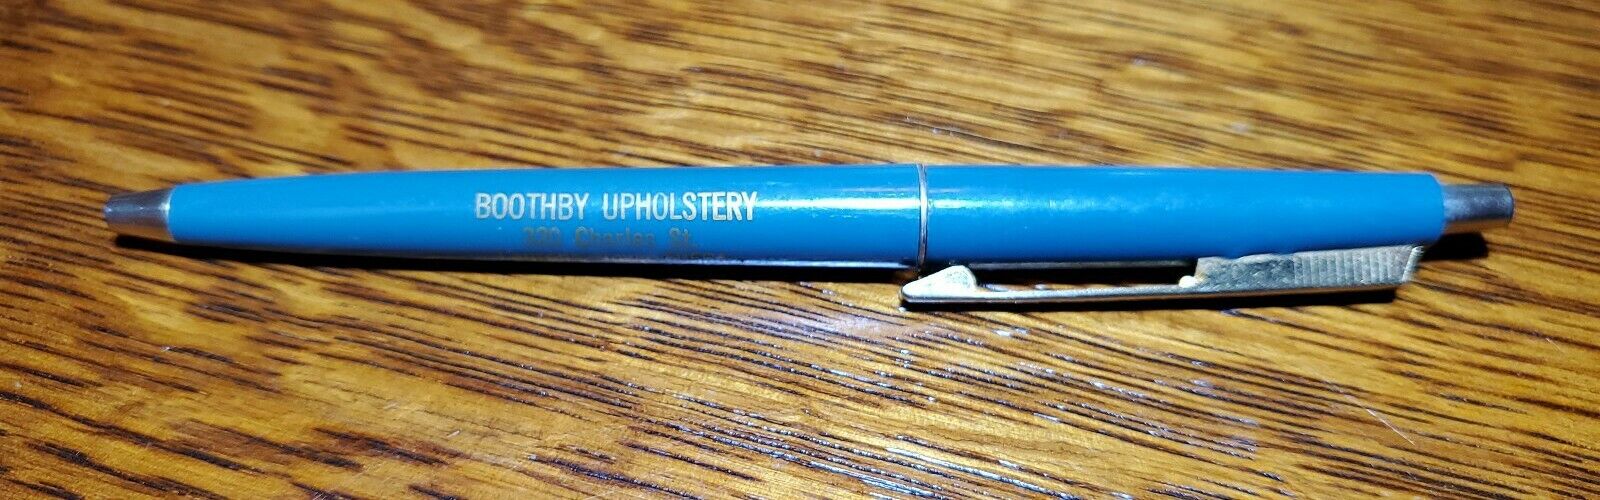 Vtg 1940\'s Ritepoint ballpoint pen, Boothby Upolstery  Laurens Iowa Advertising 